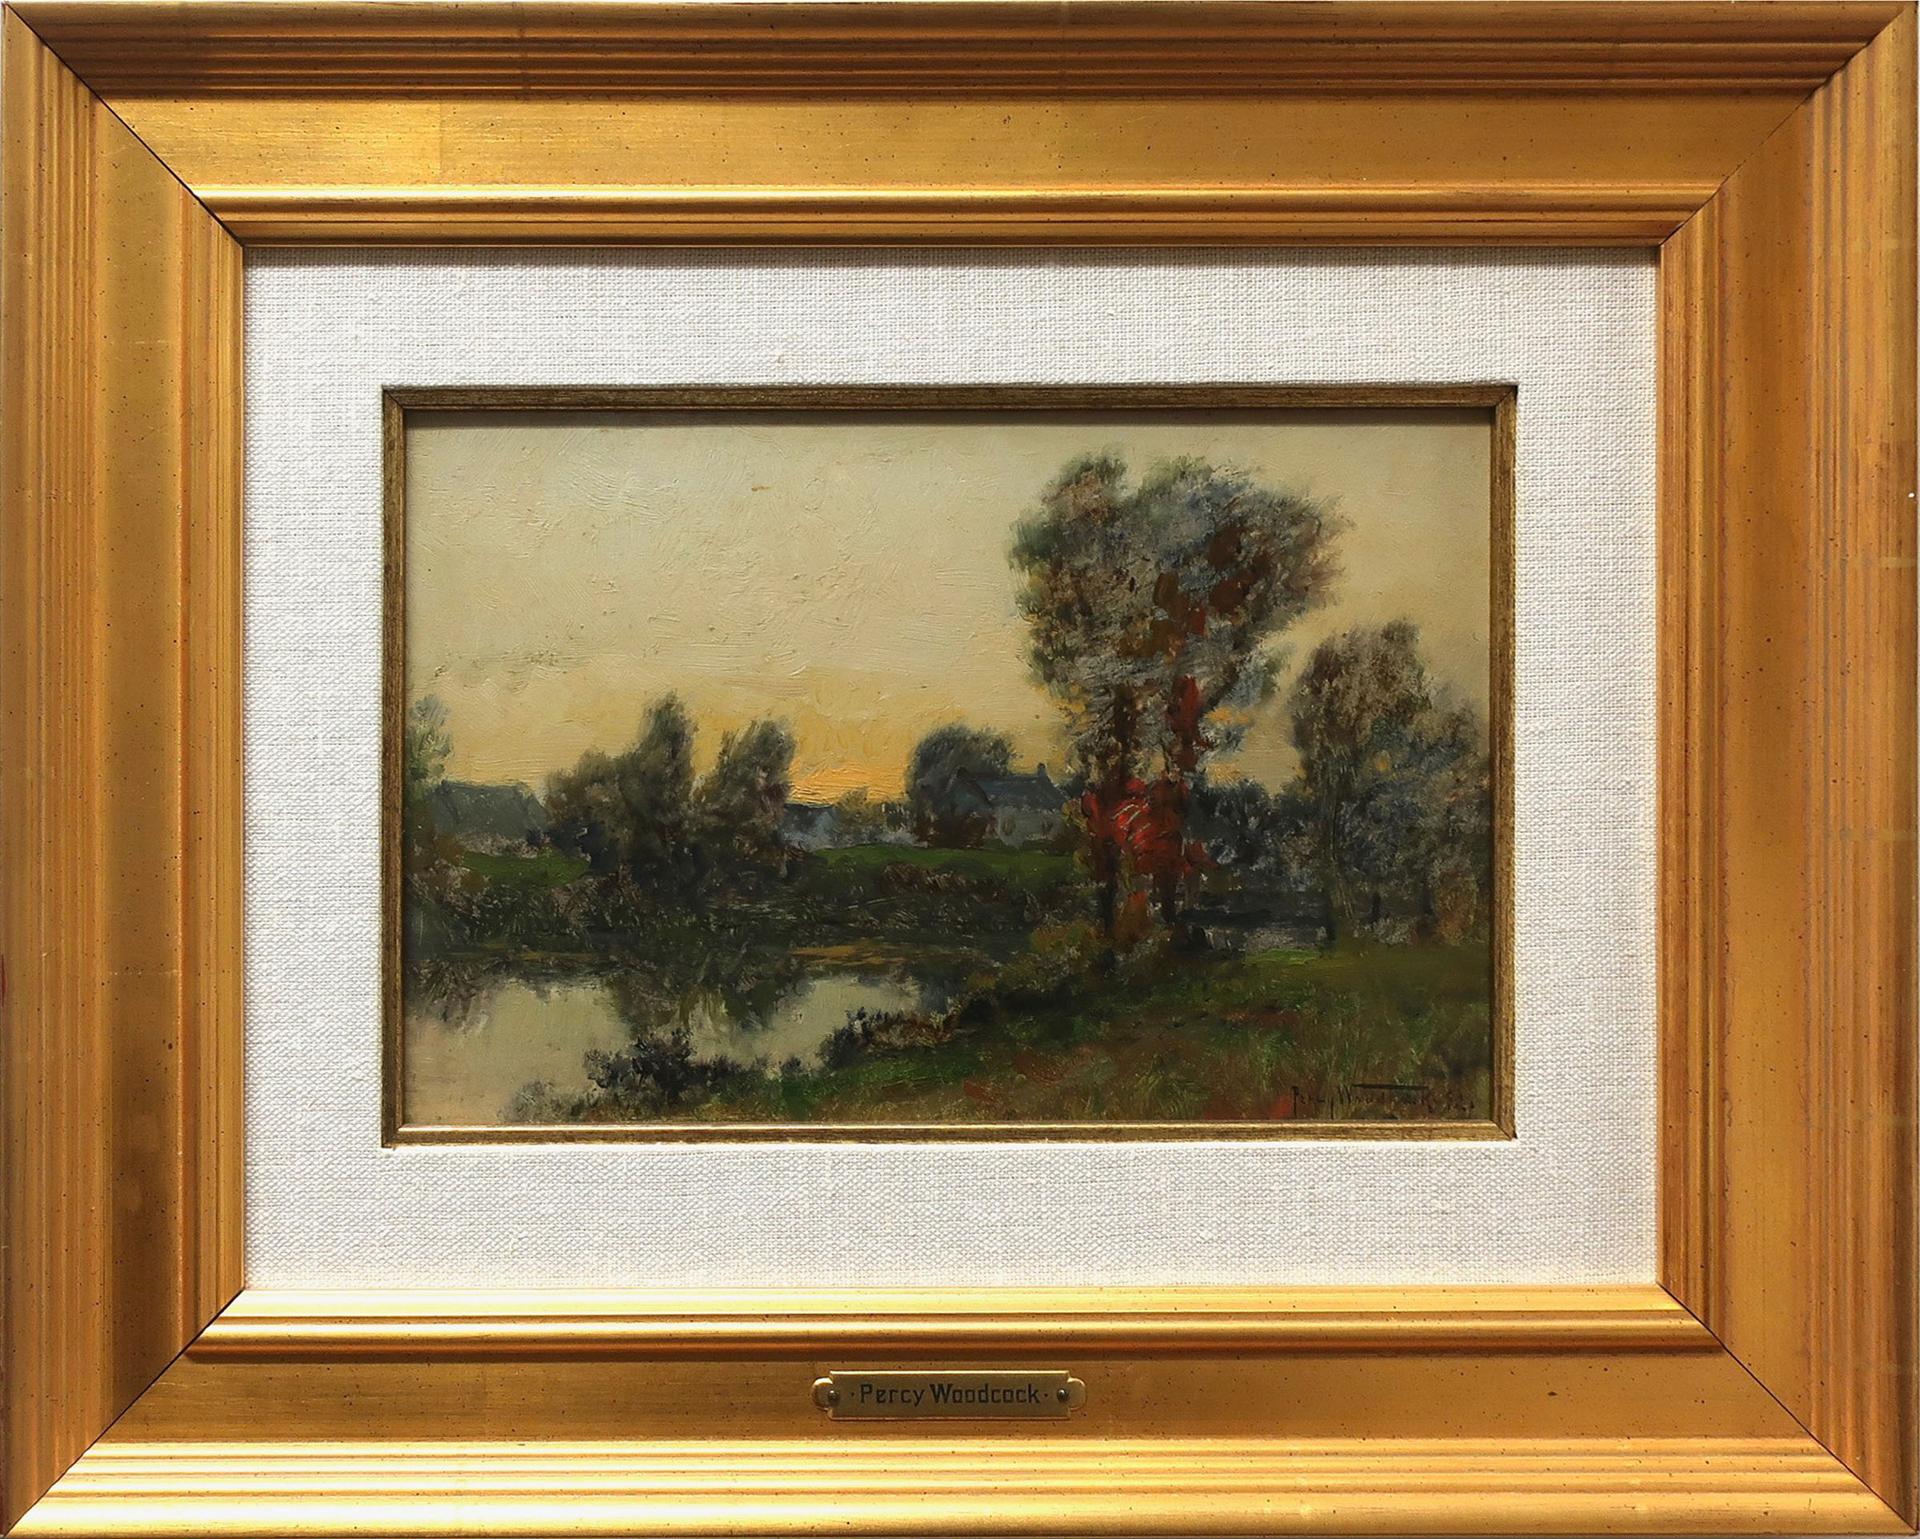 Percy Franklin Woodcock (1855-1936) - Untitled (Canadian Farmscape With Pond)